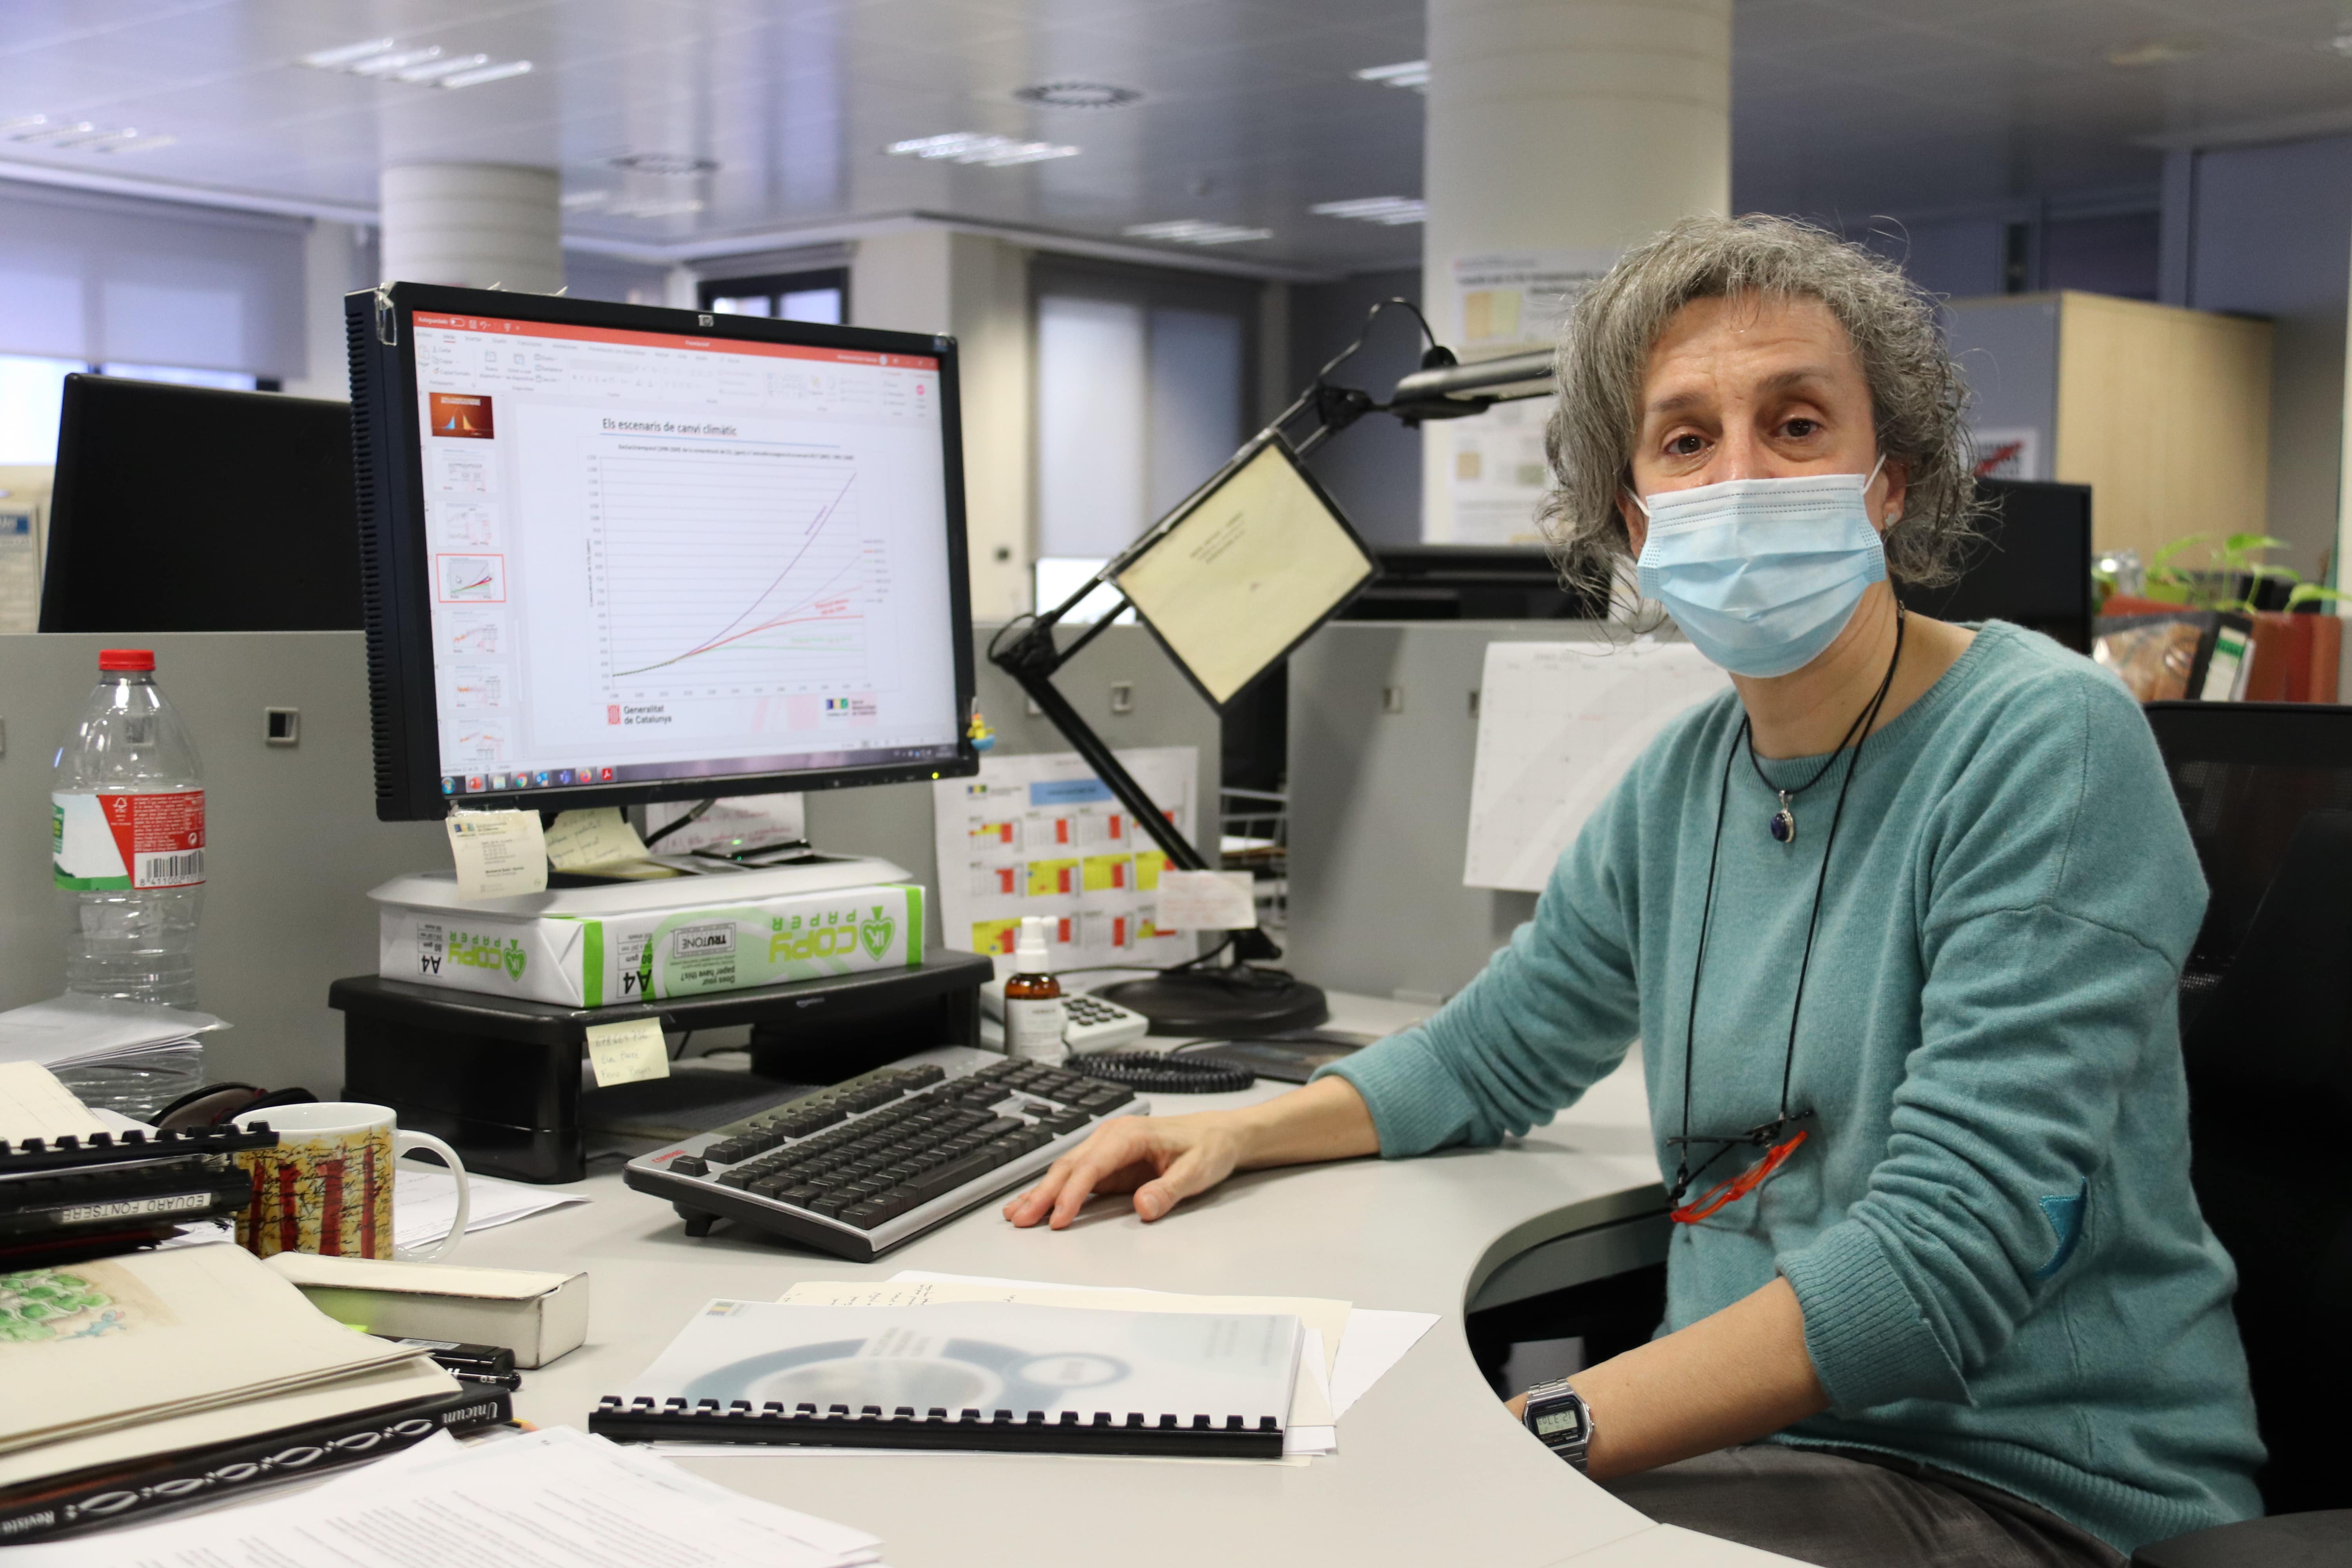 Montserrat Busto from the climate change team of Catalonia’s Meteorology Service (by Alan Ruiz Terol)